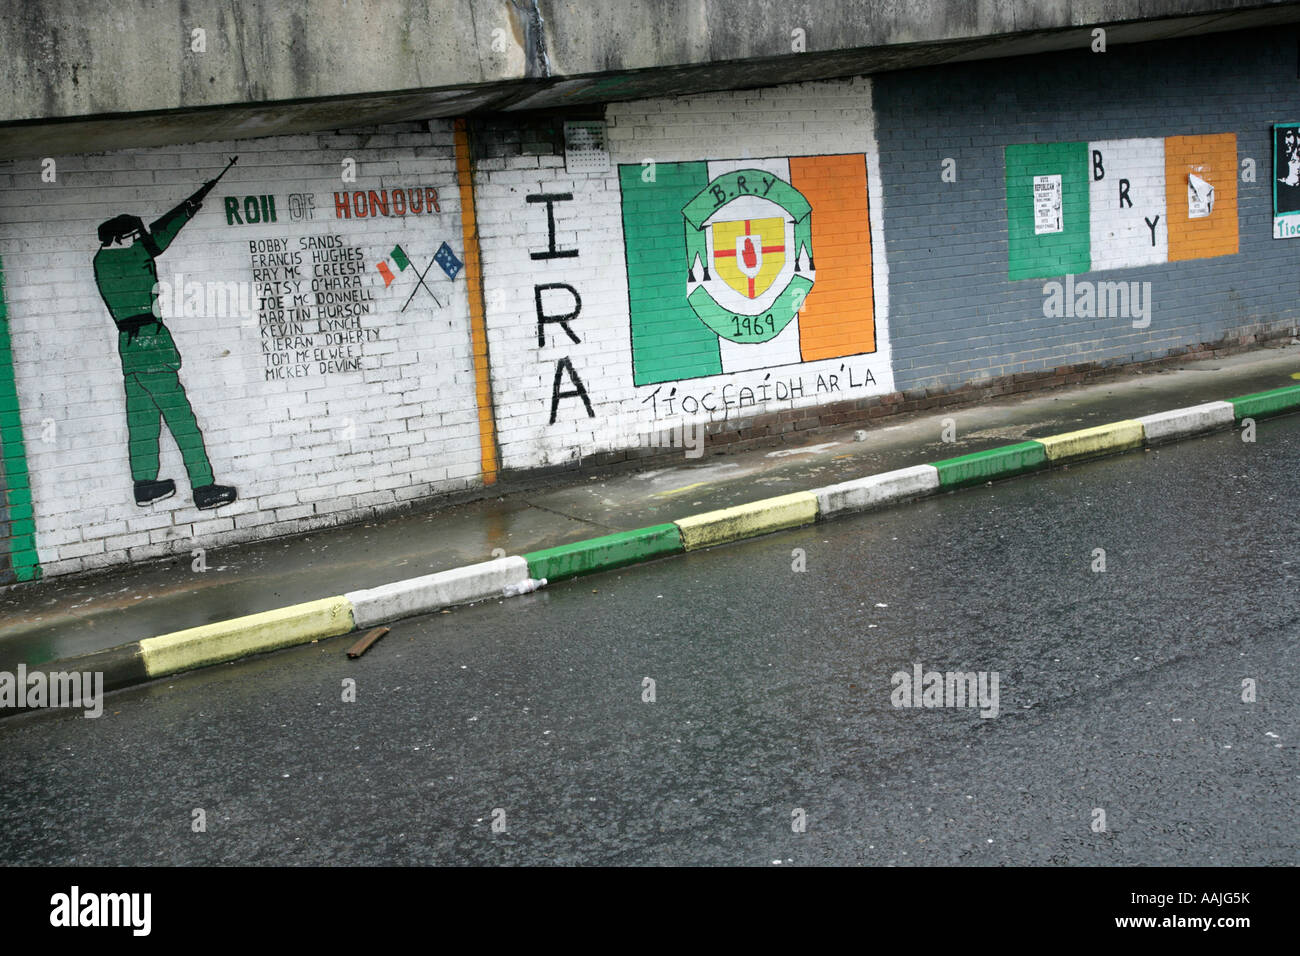 IRA mural commemorating hunger strikers, near the Bogside estate, Londonderry, County Derry, Northern Ireland. Stock Photo